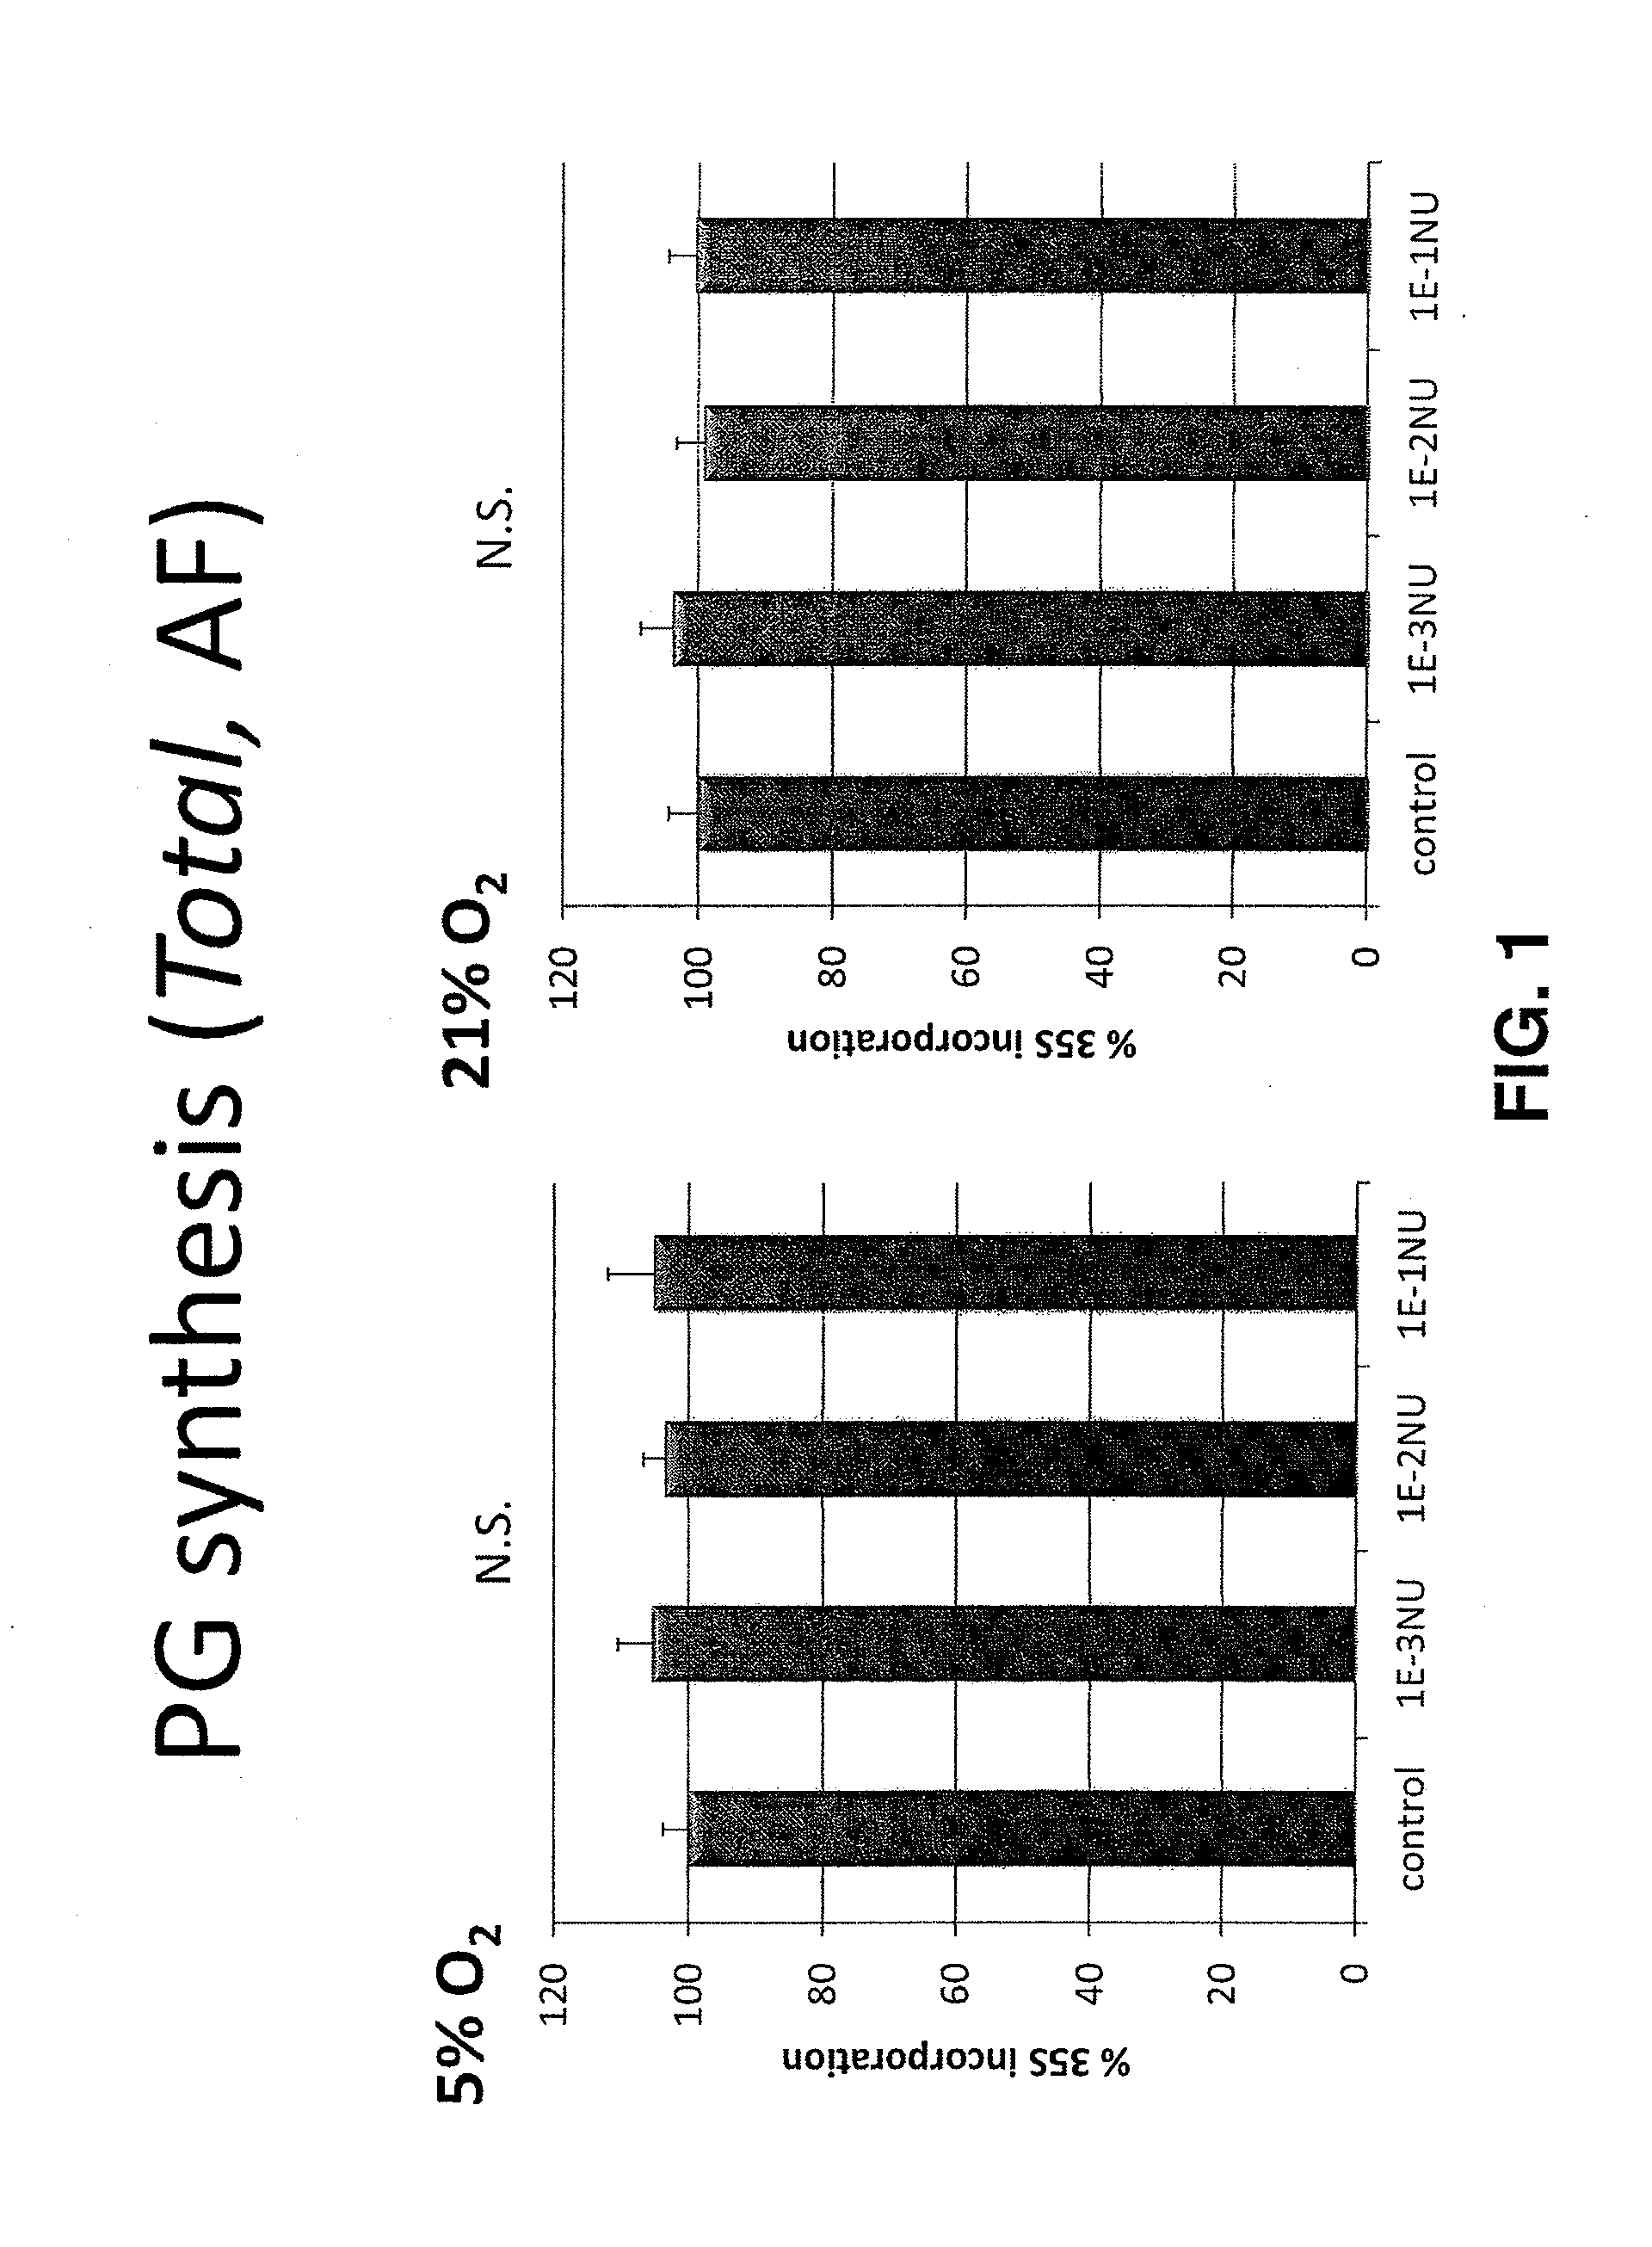 Method for promoting the synthesis of collagen and proteoglycan in chondrocytes